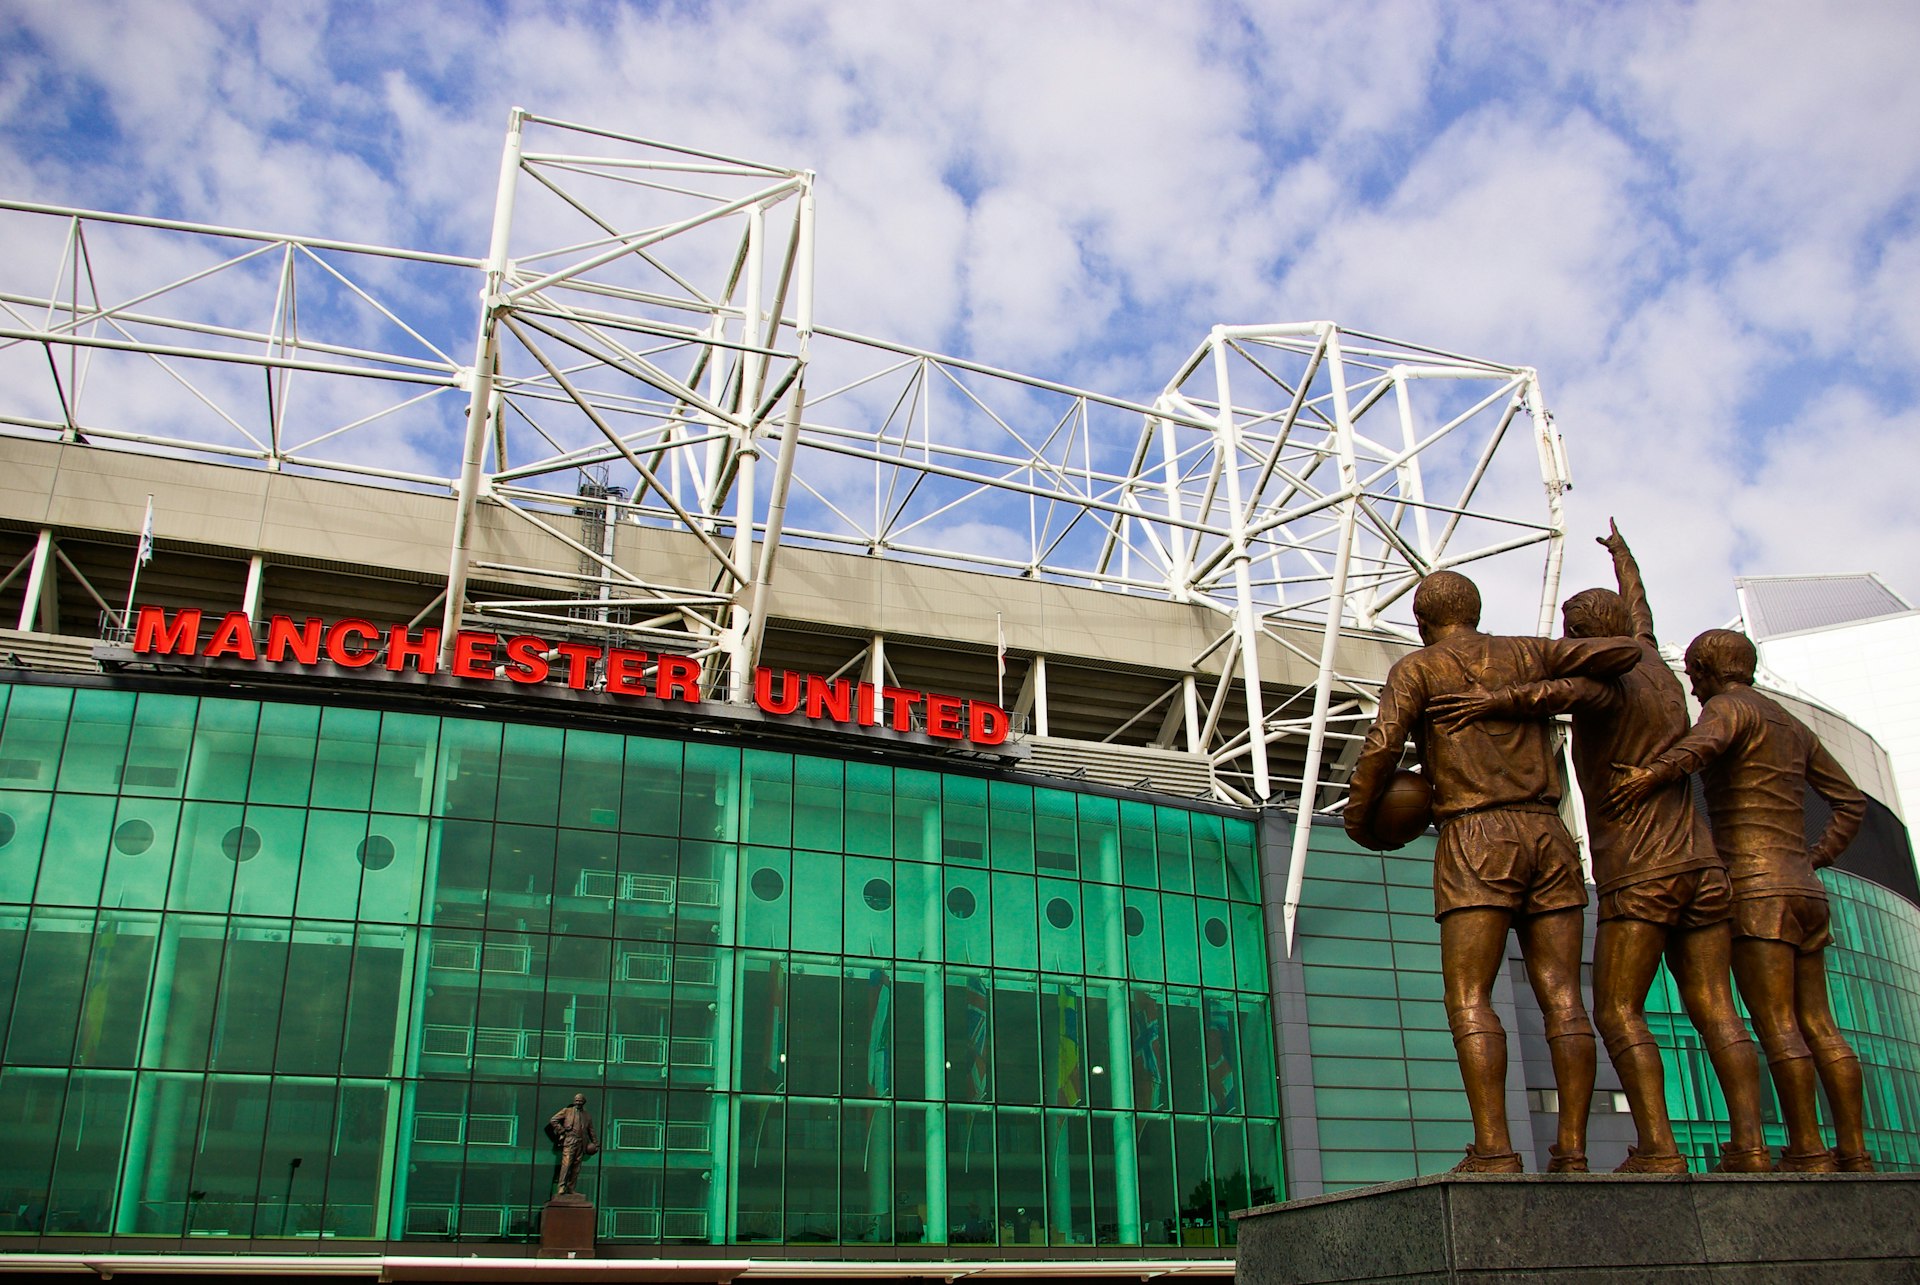 Old Trafford stadium in Manchester, England: Old Trafford is home of Manchester United football club 